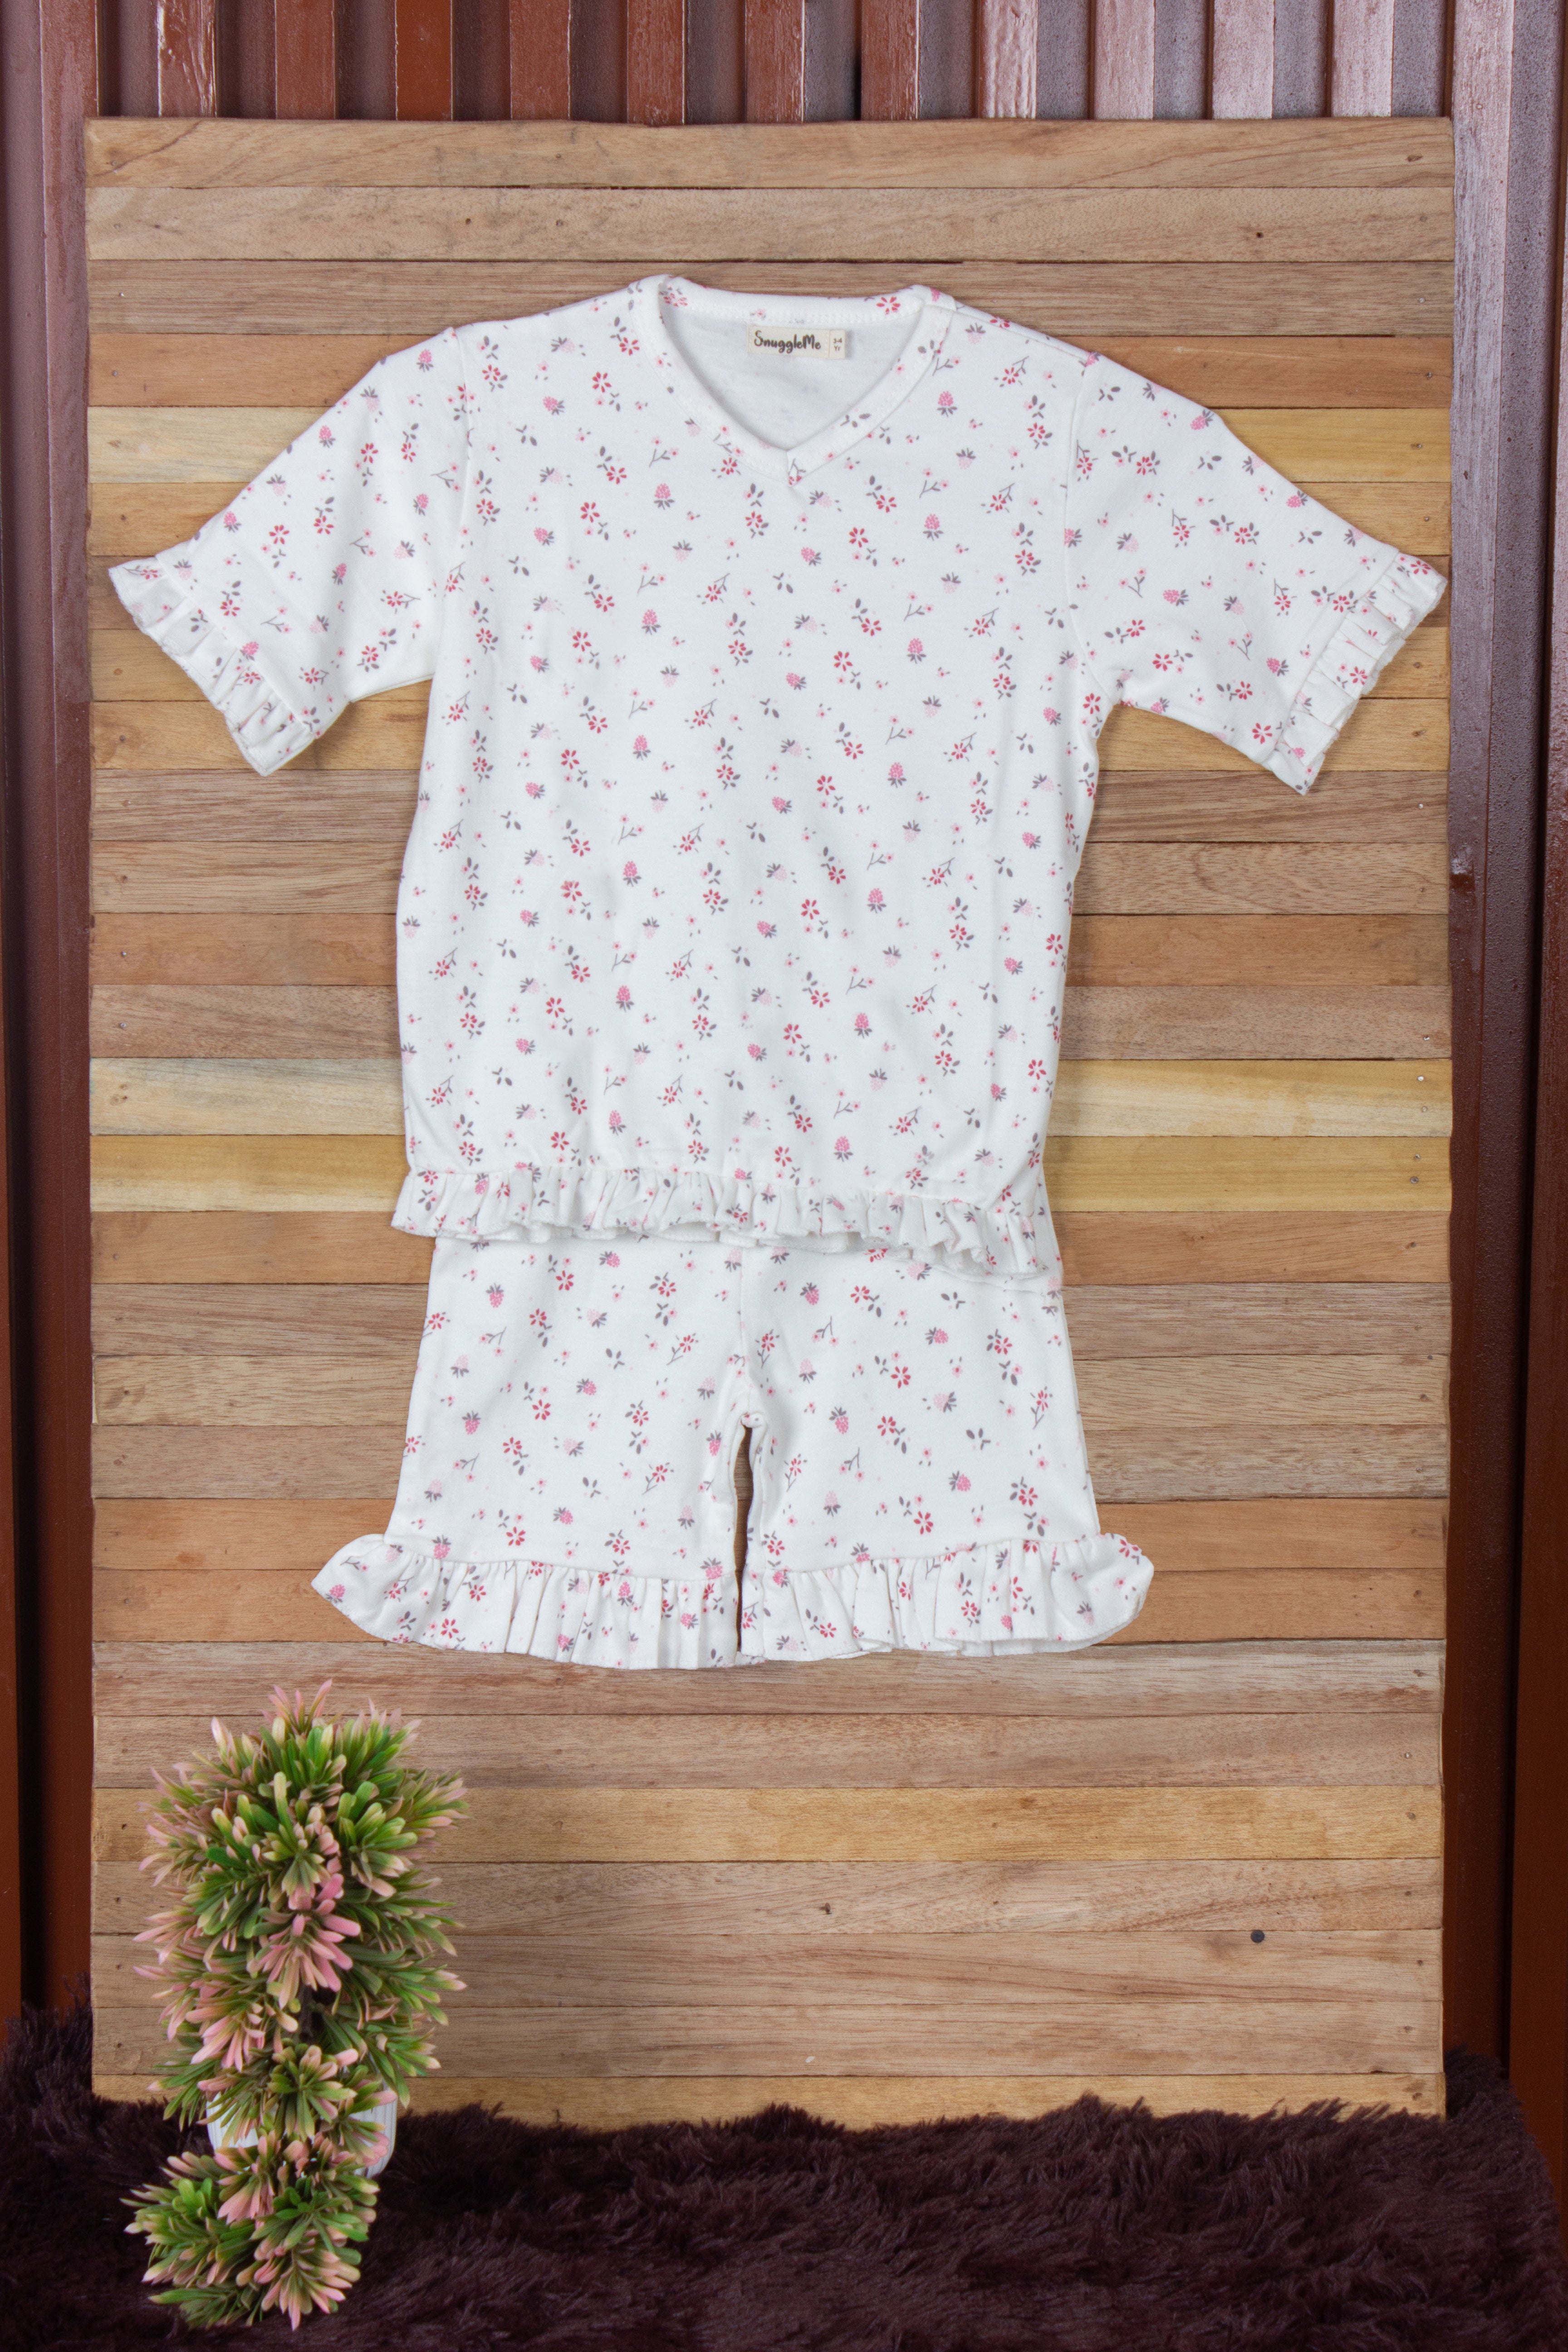 Snuggleme Girls Floral Print Nightsuit with Frill Shorts-White